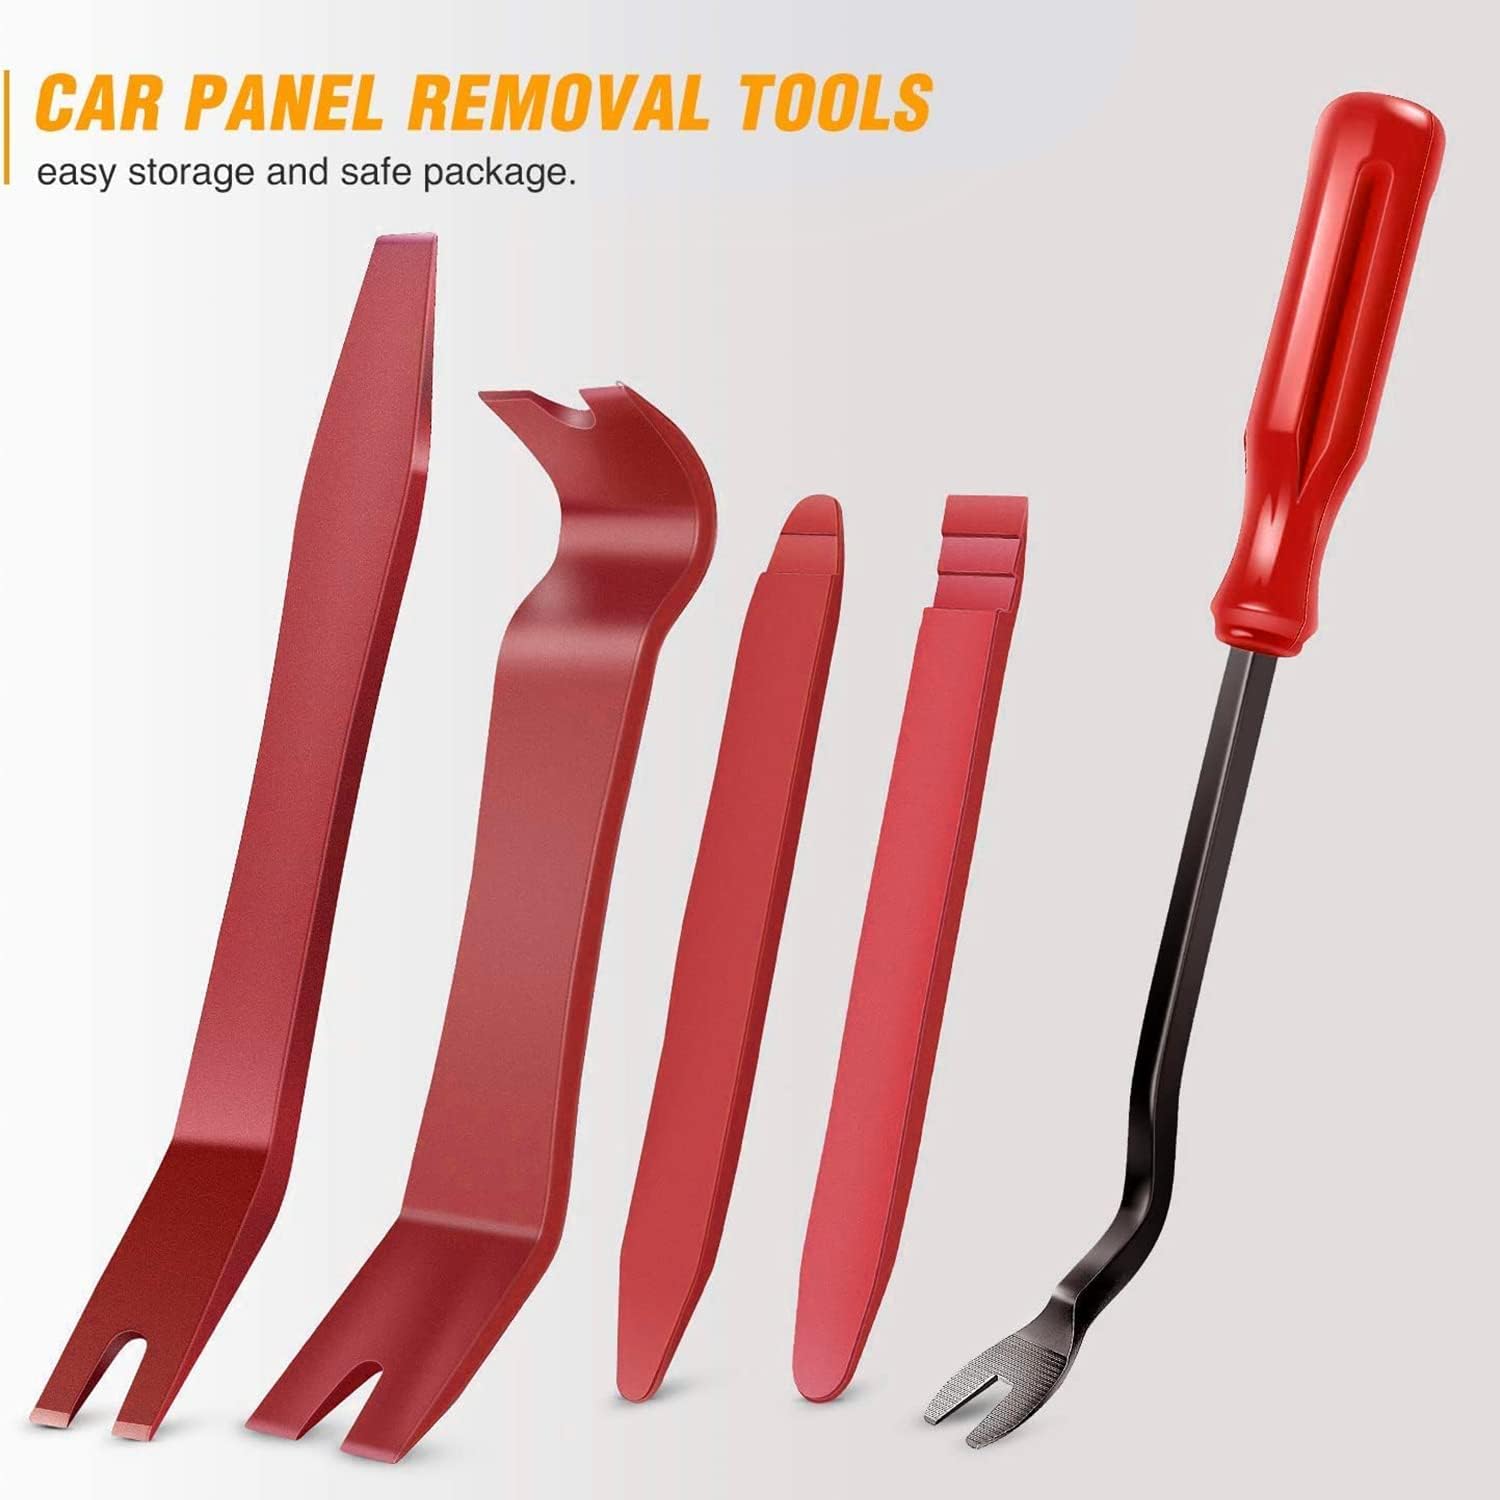 GOOACC 5 PCS Nylon Auto Trim Removal Tool Kit No-Scratch Removal Tool Kit for Car Panel & Audio Dashboard Dismantle Red